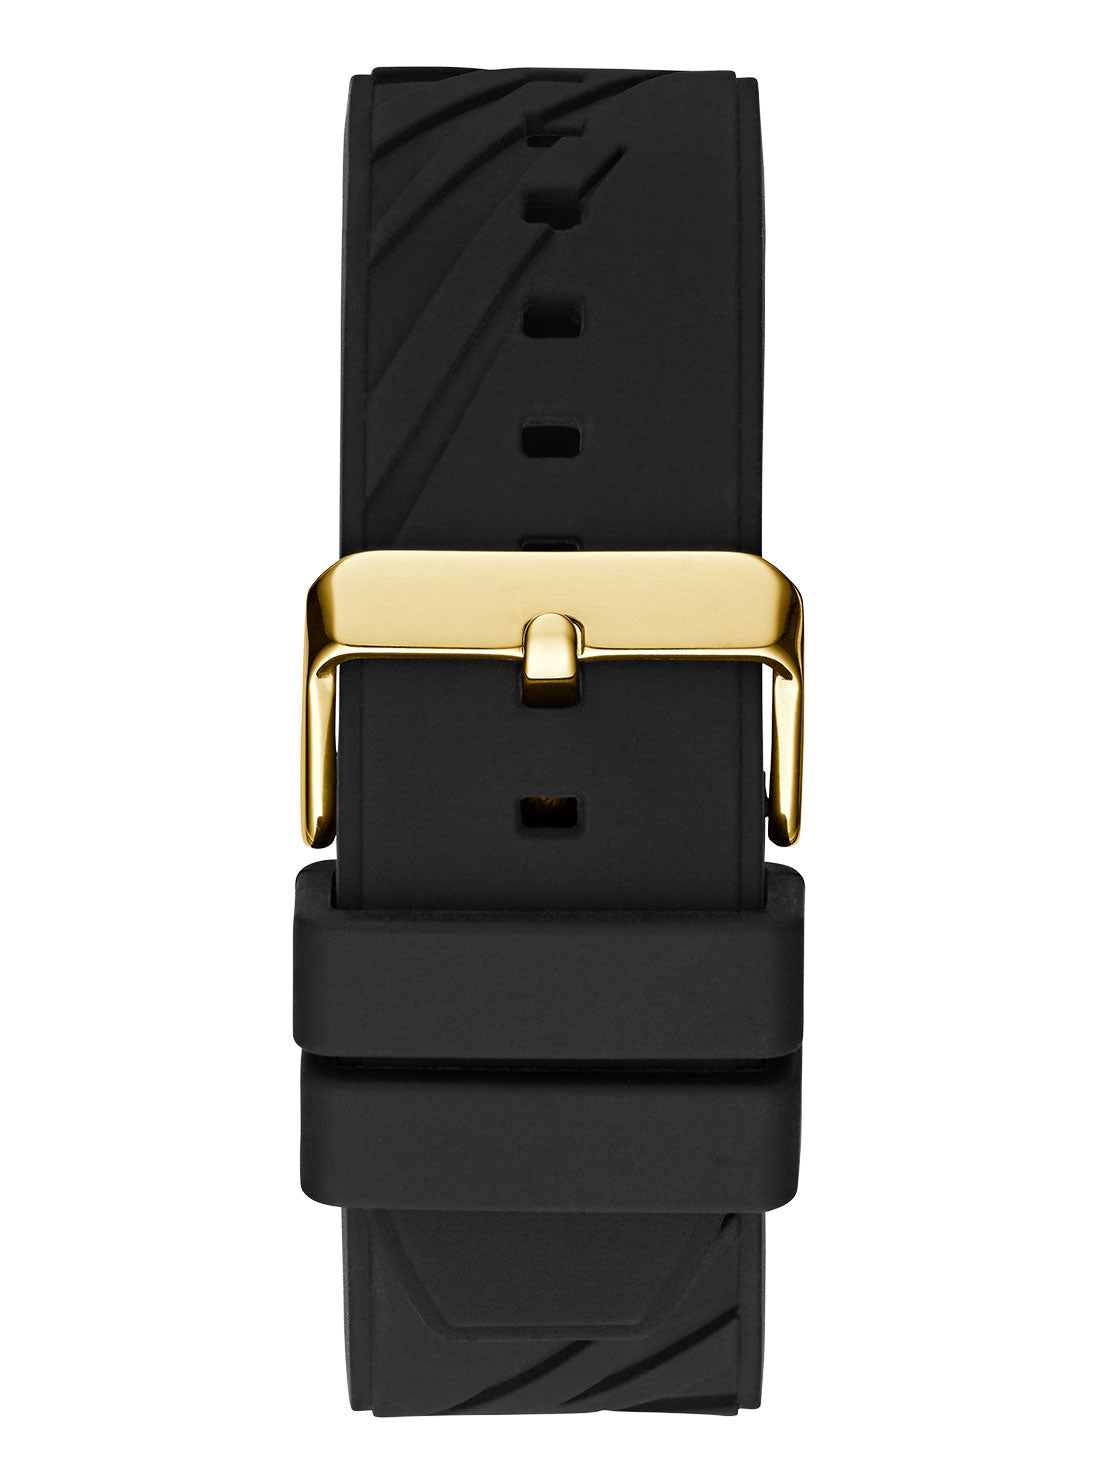 GUESS Men's Black Gold Rival Silicone Watch GW0634G2 Back View